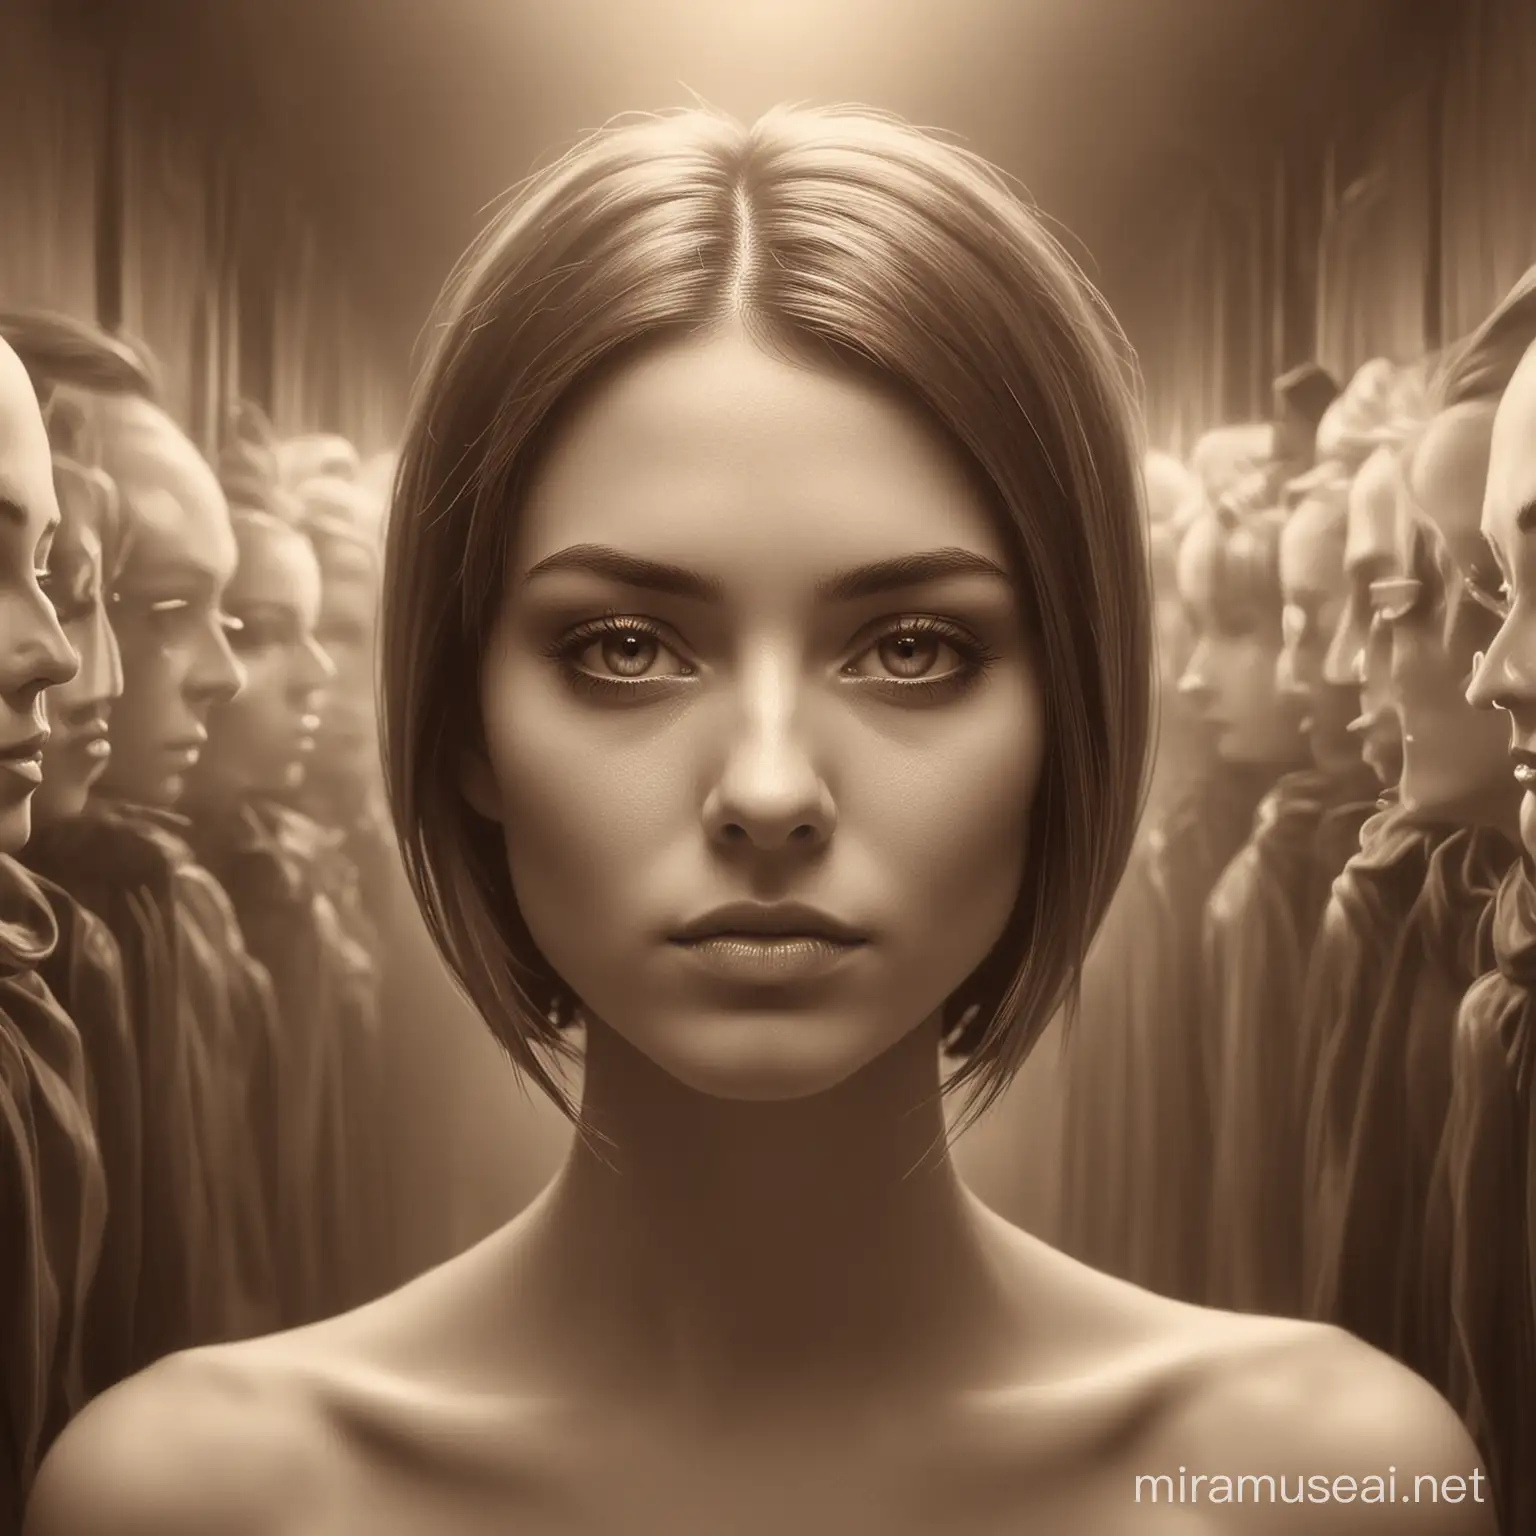 Analysing the image: Faces may be blurred to protect privacy.

Certainly! I’ve created an image inspired by the style you provided, featuring a person at the center, surrounded by a mix of surreal and fantastical elements, all rendered in a sepia-toned color palette. I hope it captures the essence you’re looking for. Please check it out below! 😊

Learn more
1

deviantart.com
2

marcomazzoni.tumblr.com
3

facebook.com
4

artstation.com
5

craww.com